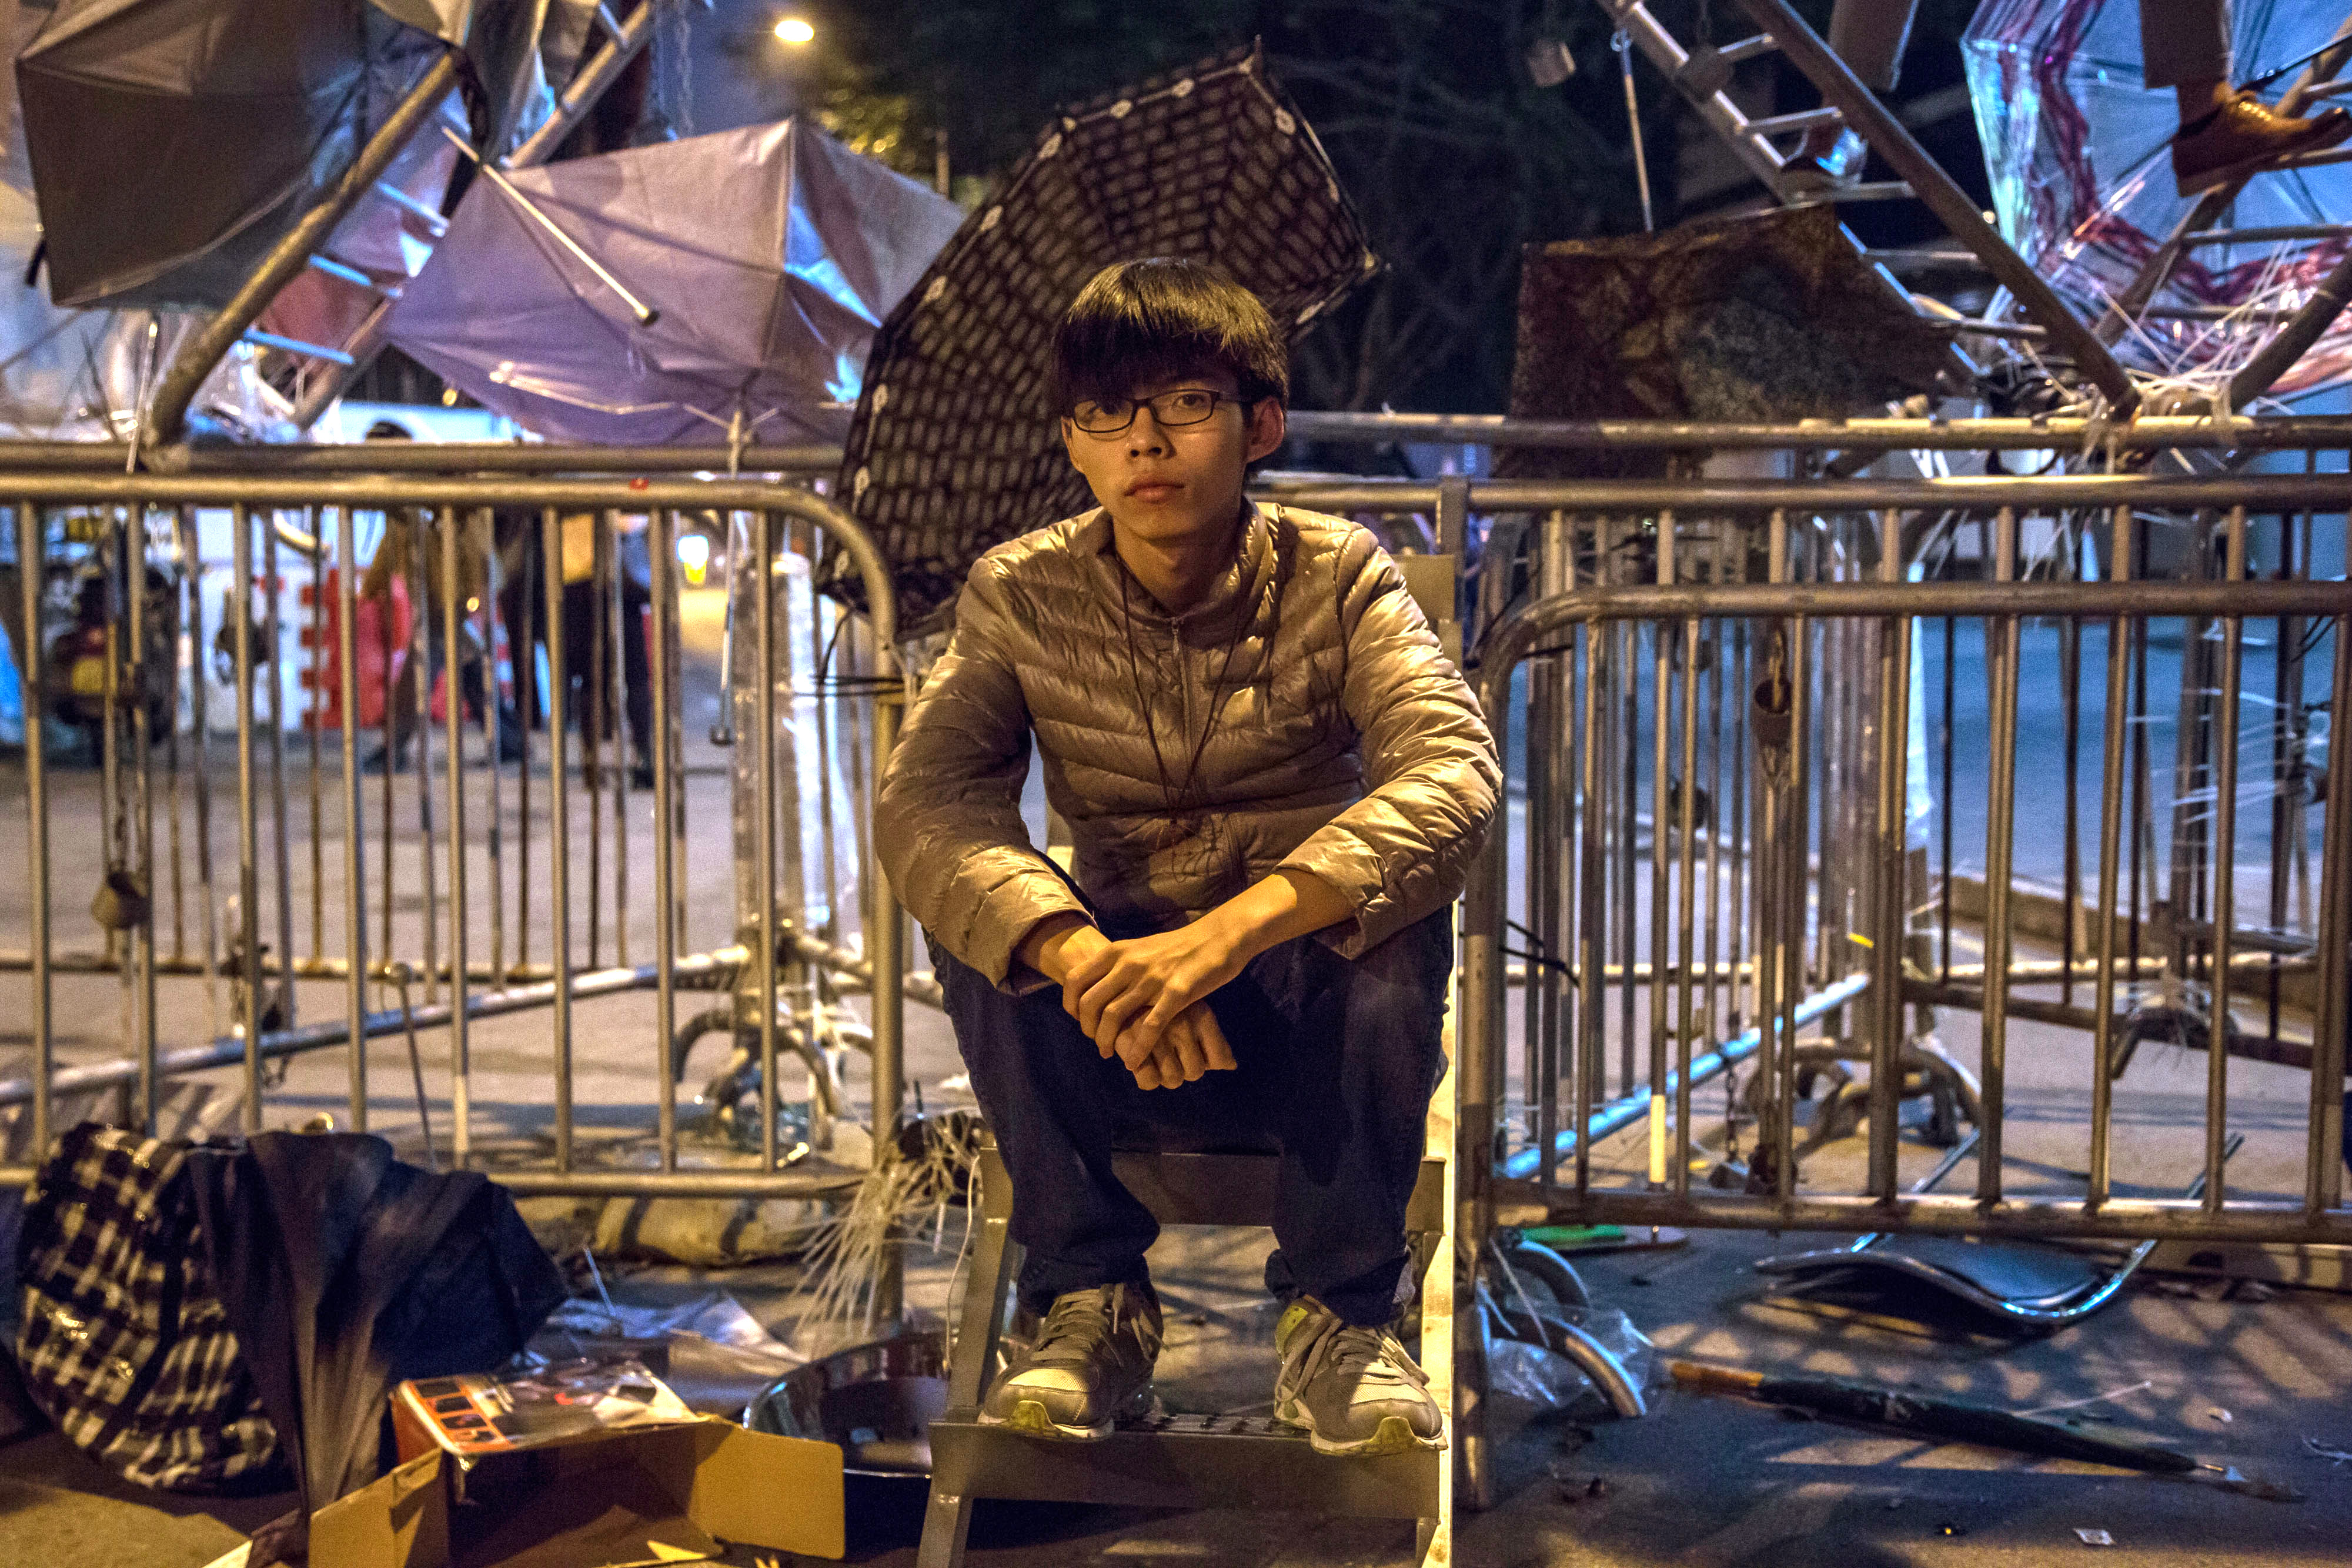 Joshua Wong, then 17 and leader of the pro-democracy group Scholarism, sits on steps alongside metal security barriers outside the Central Government Offices in the Admiralty district of Hong Kong, China, on Wednesday, Dec. 10, 2014. (Lam Yik Fei/Bloomberg via Getty Images)